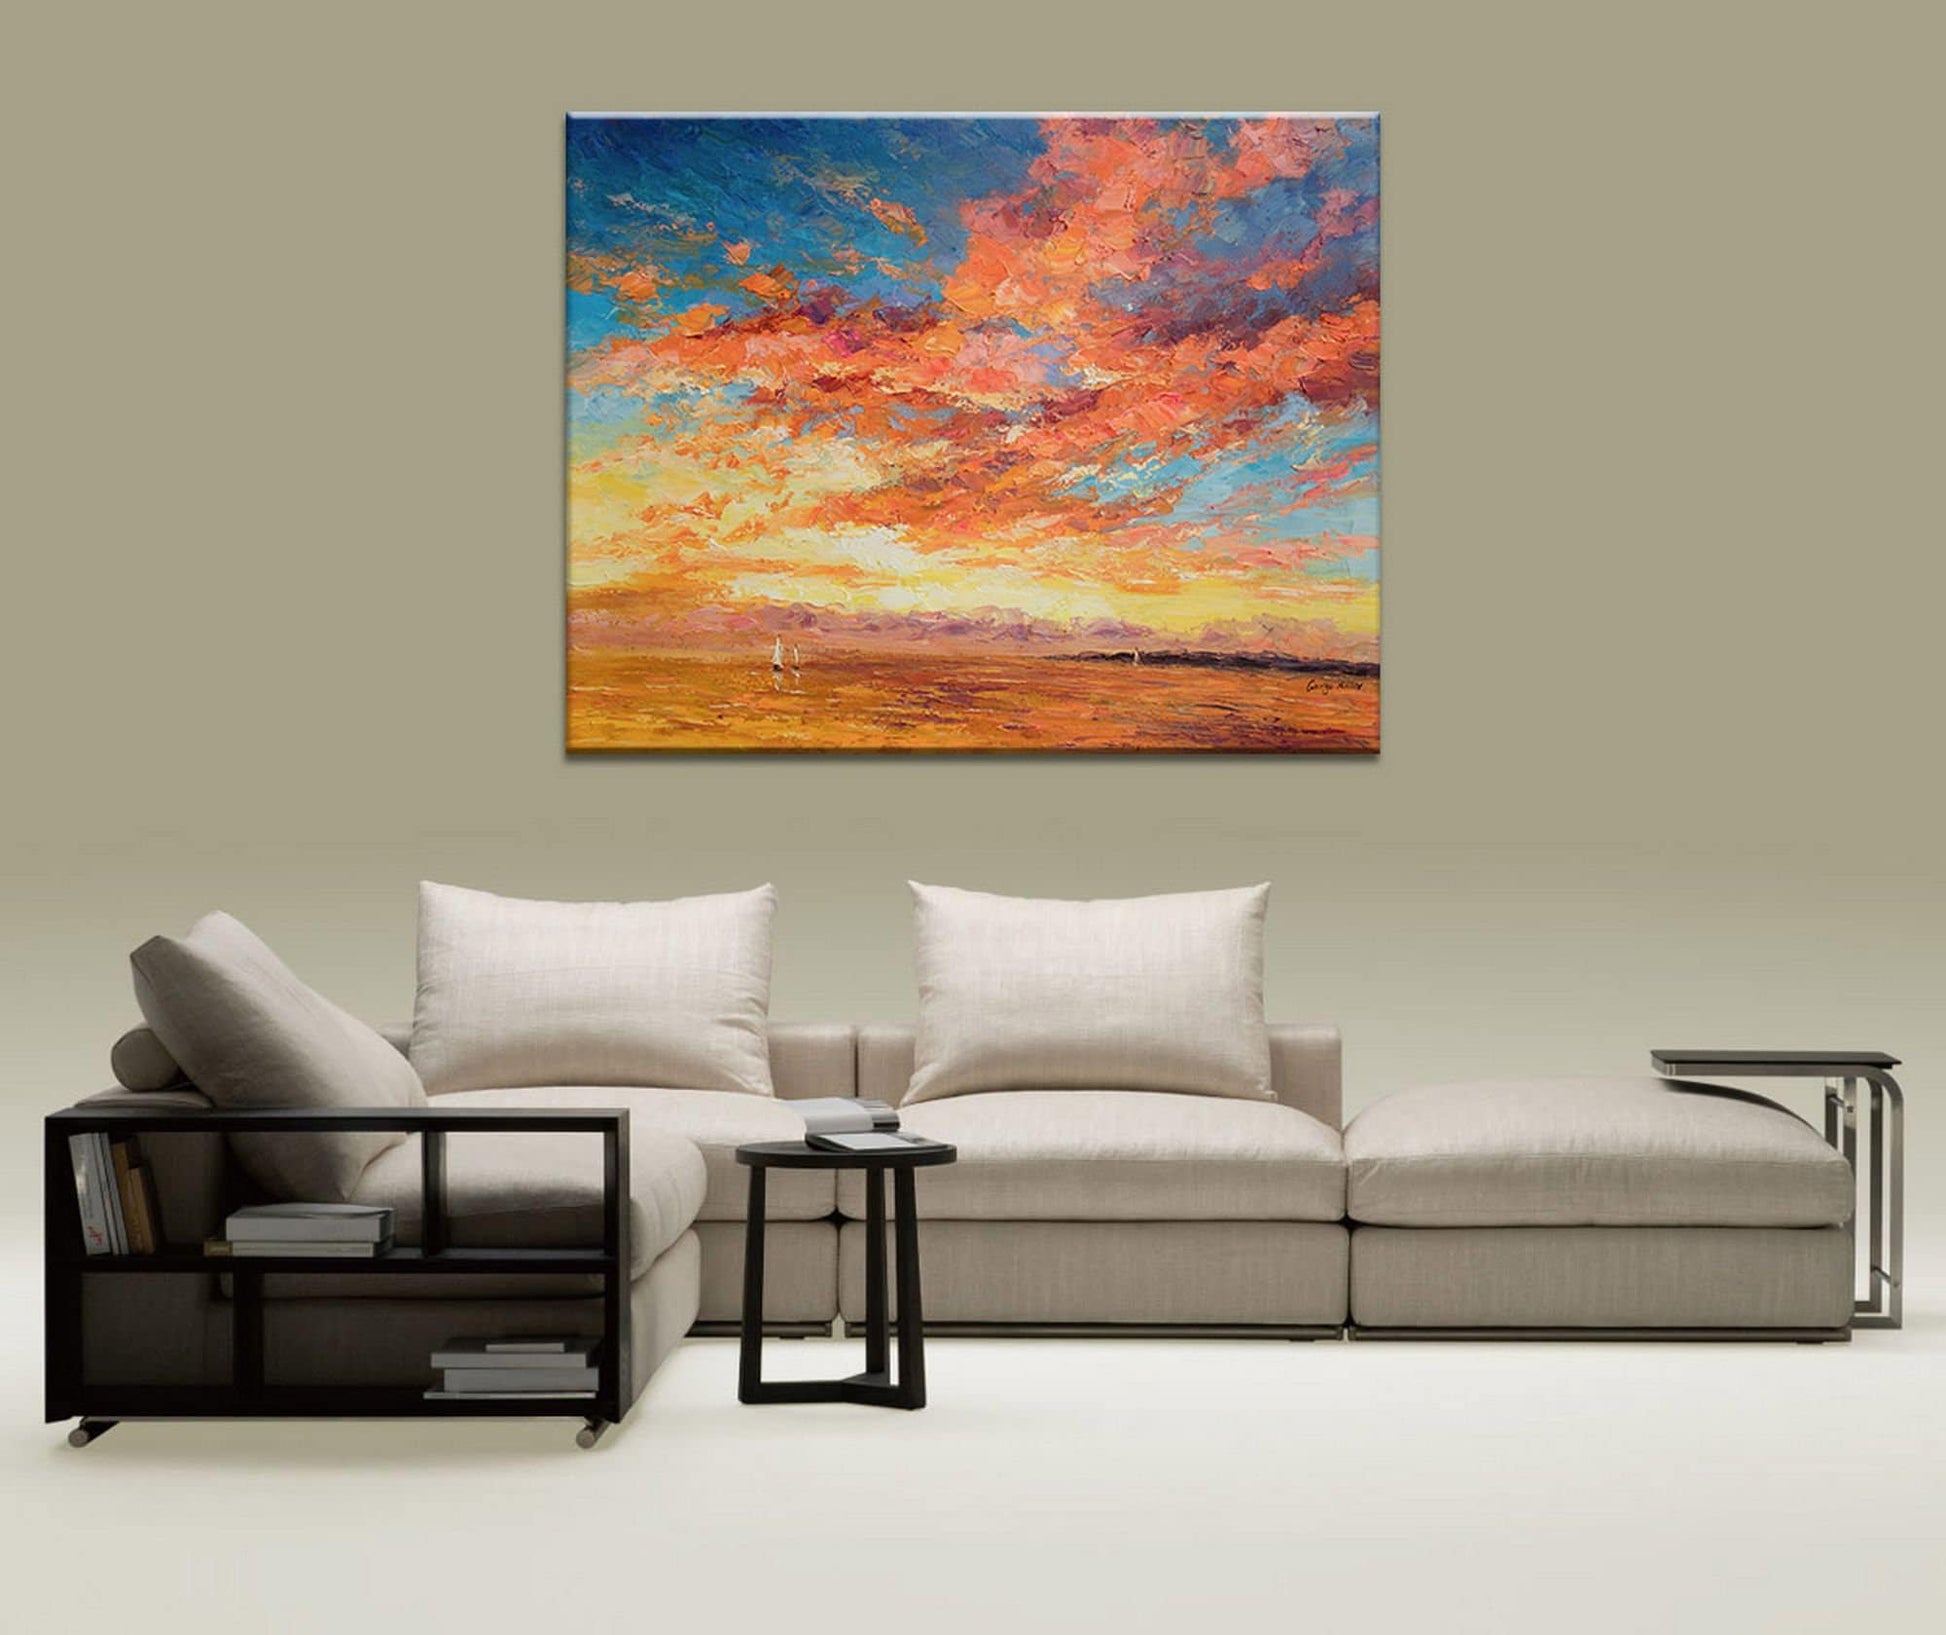 Large Wall Art Seascape Oil Painting Boats at Sea Sunset, Abstract Art, Living Room Wall Decor, Original Oil Painting, Large Abstract Art